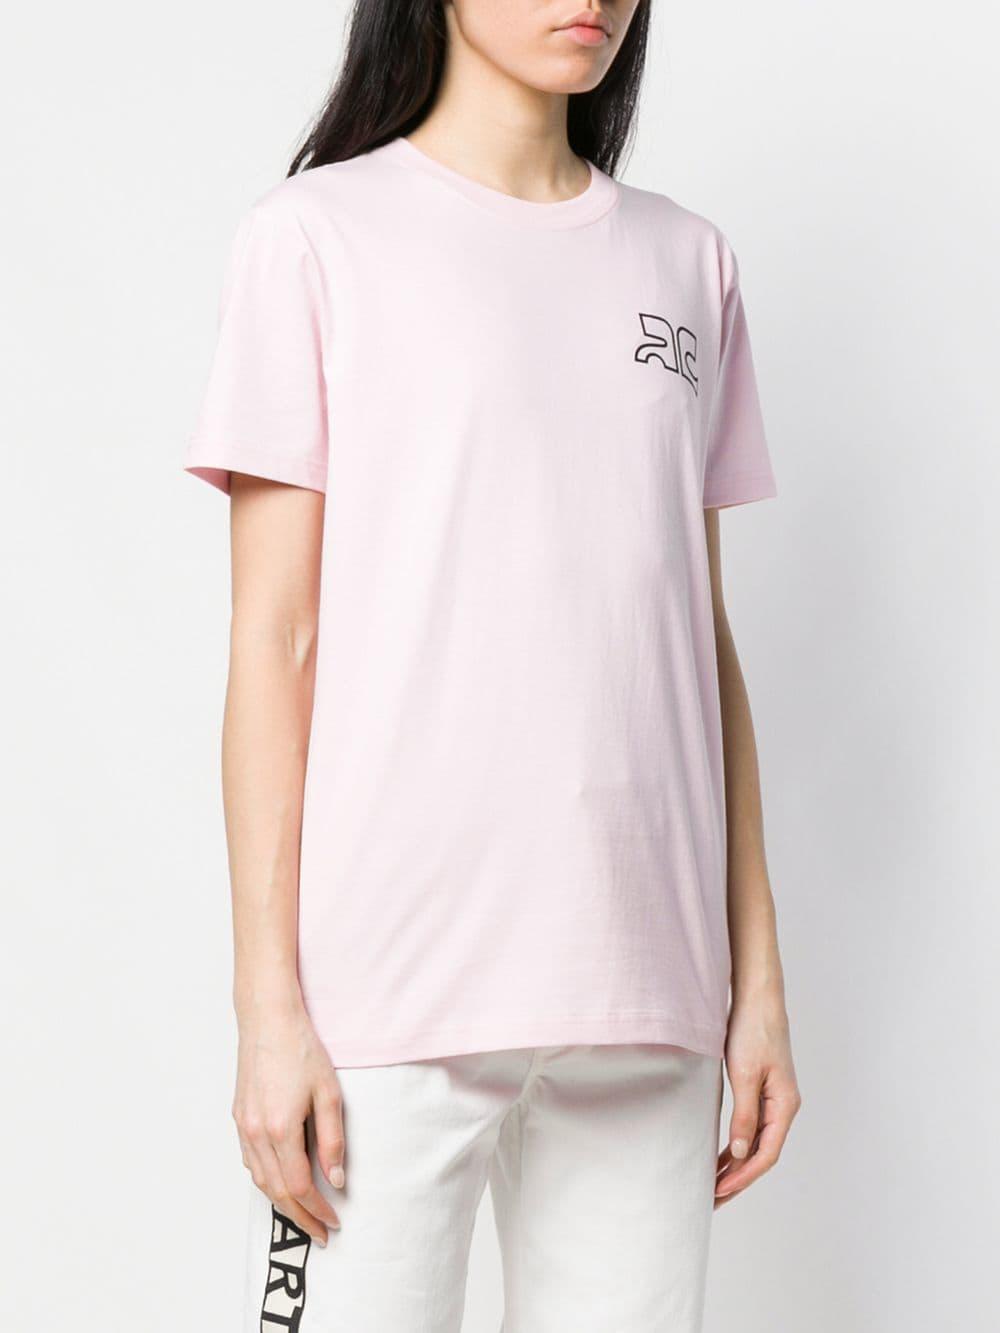 Lyst - Courreges Logo T-shirt in Pink - Save 19%